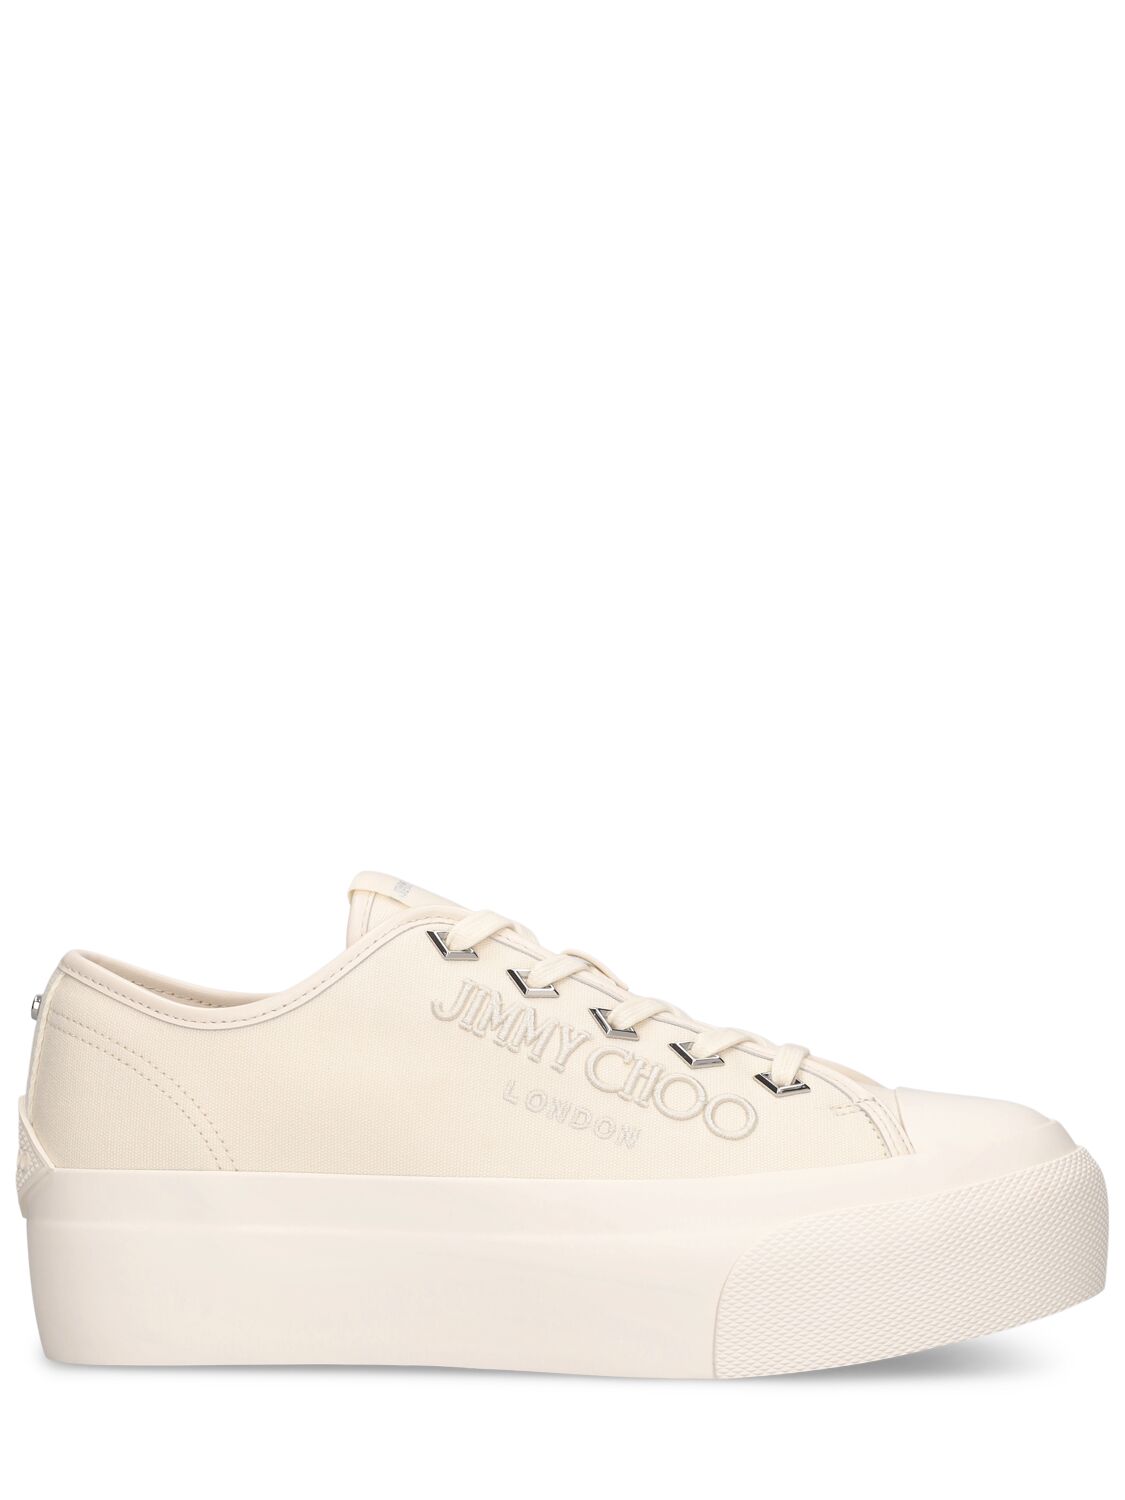 Jimmy Choo Palma Maxi Canvas & Leather Sneakers In Off White